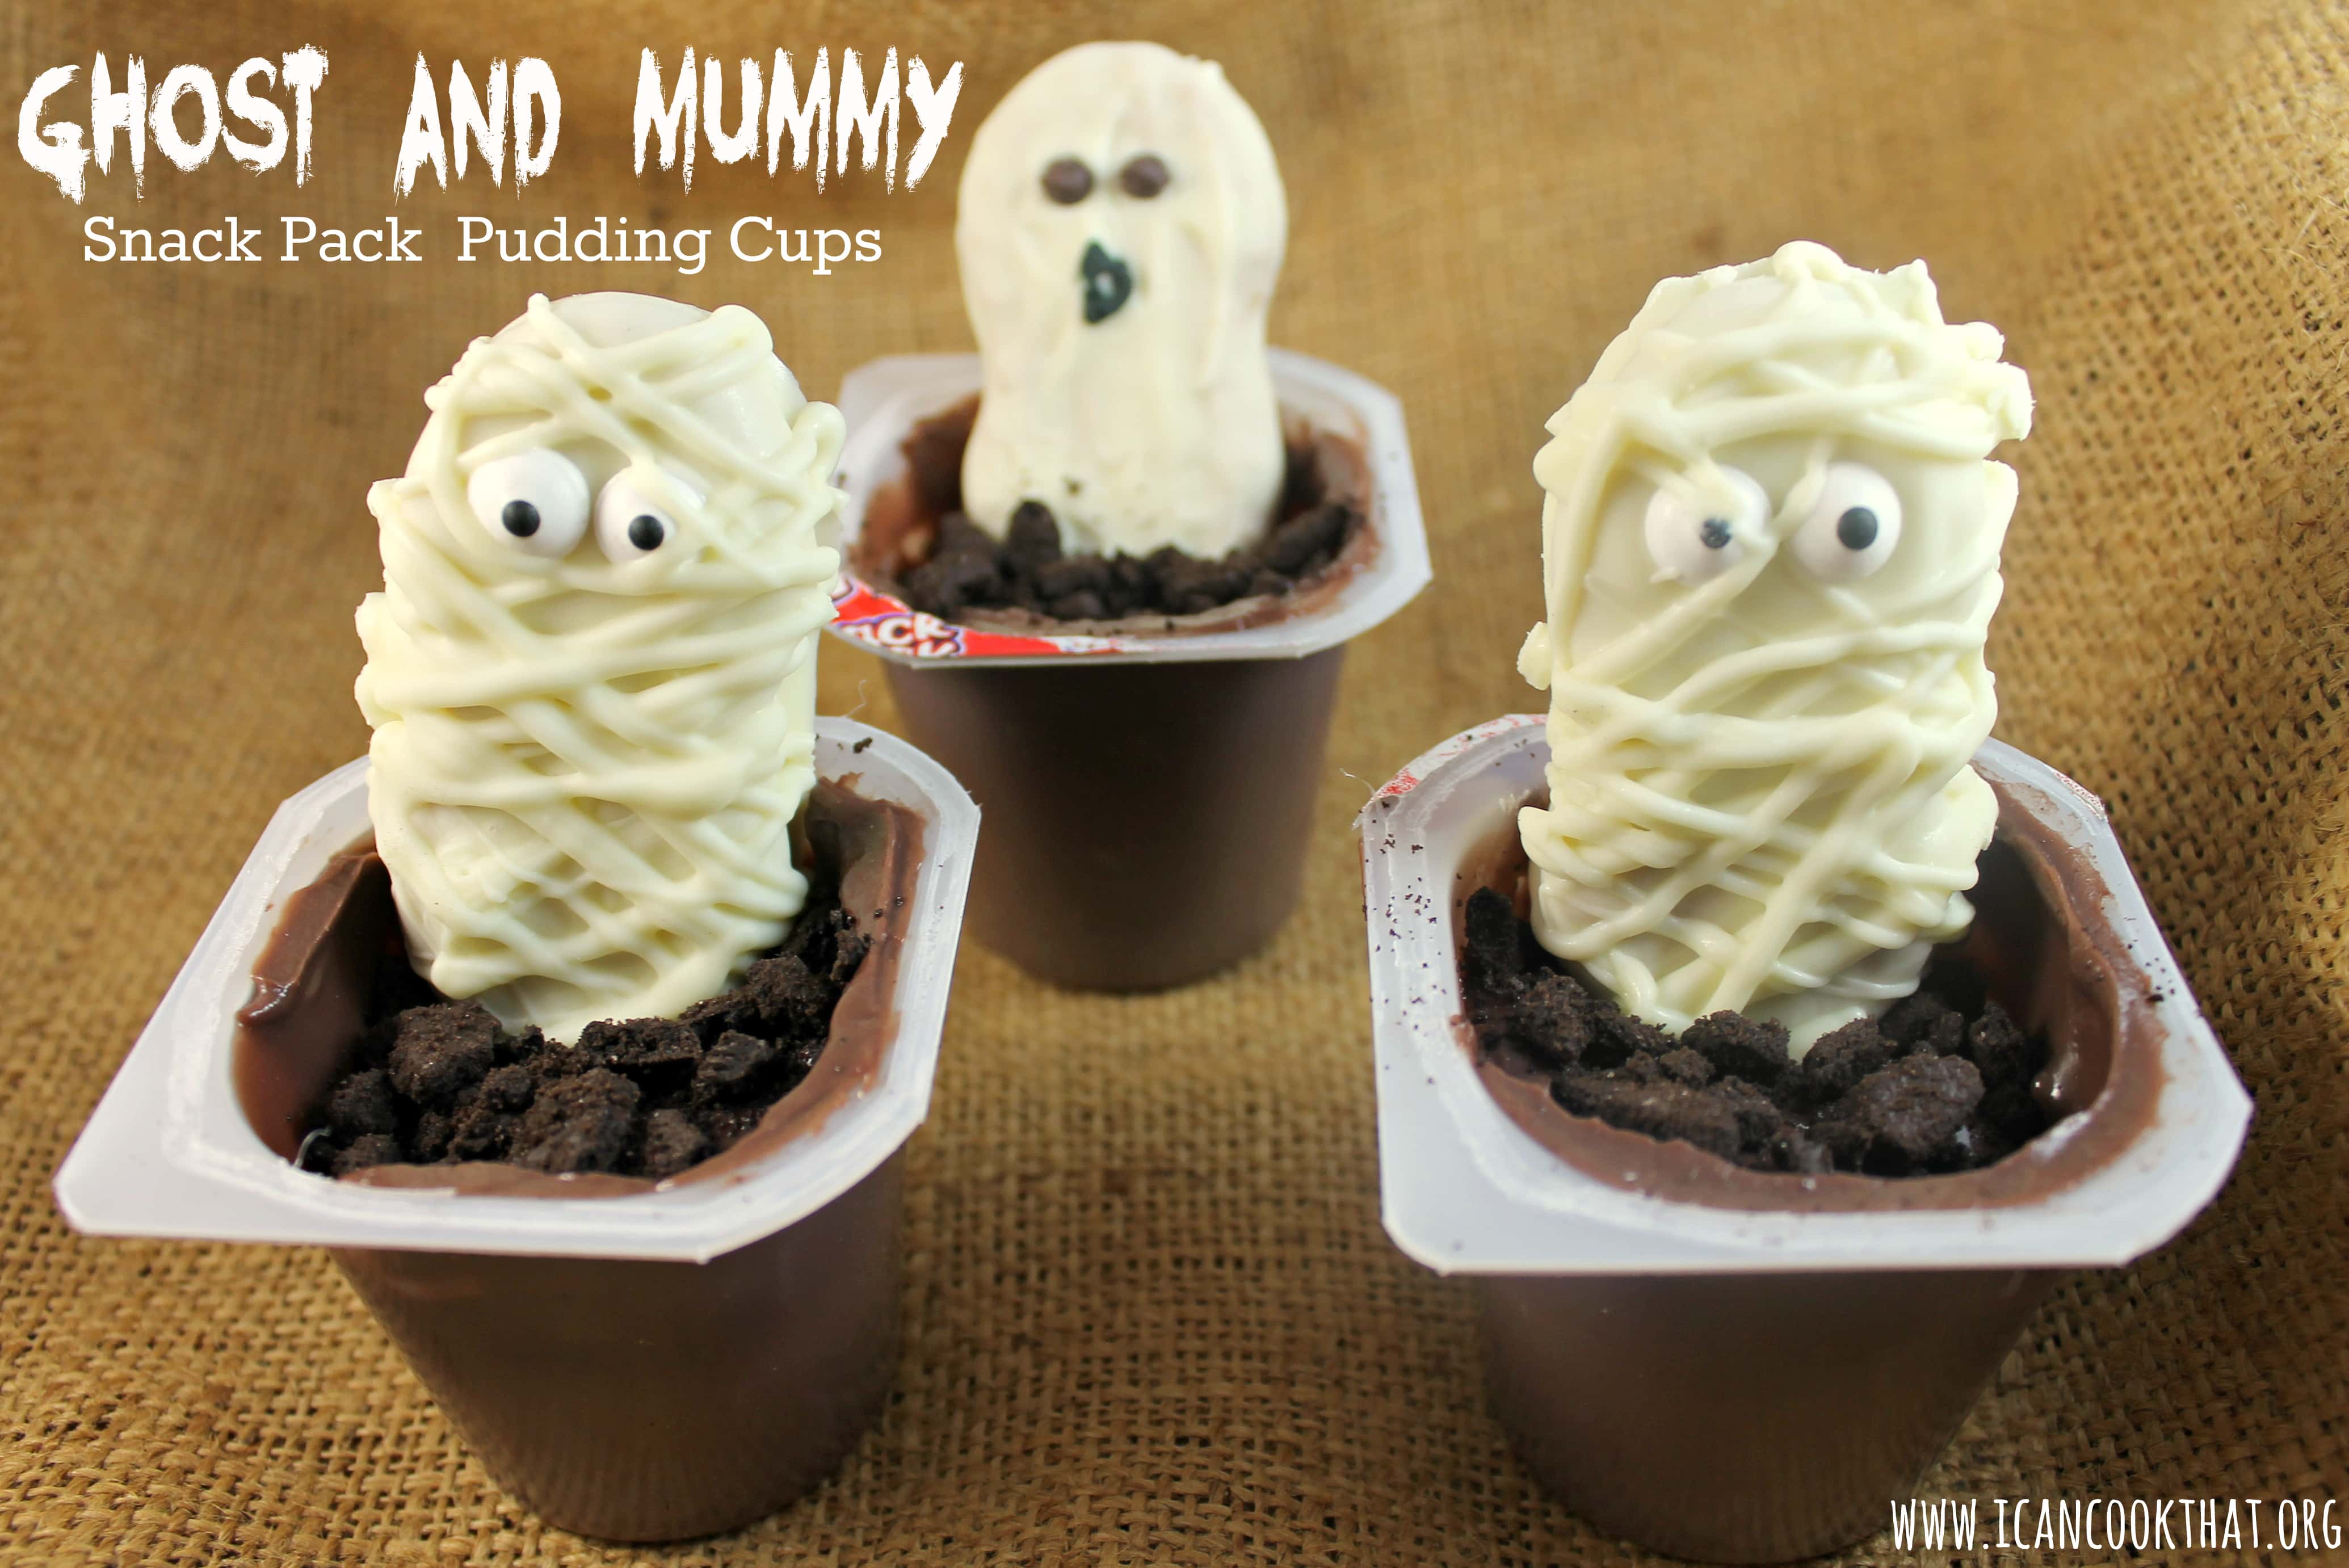 Ghost and Mummy Snack Pack Pudding Cups